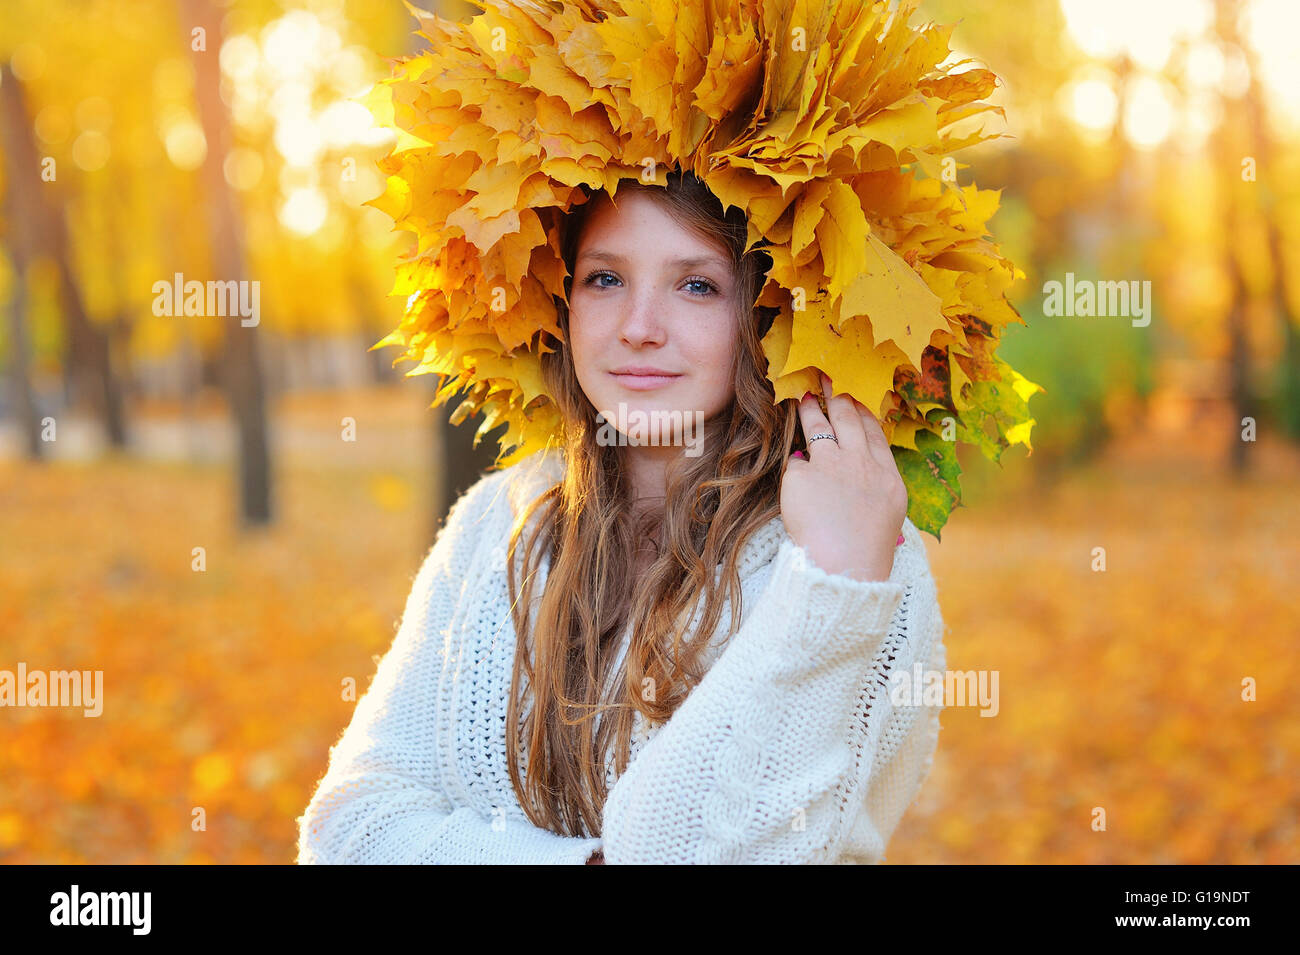 Autumn Woman. Blonde Girl and Yellow Leaves. Portrait. Fall Stock Photo